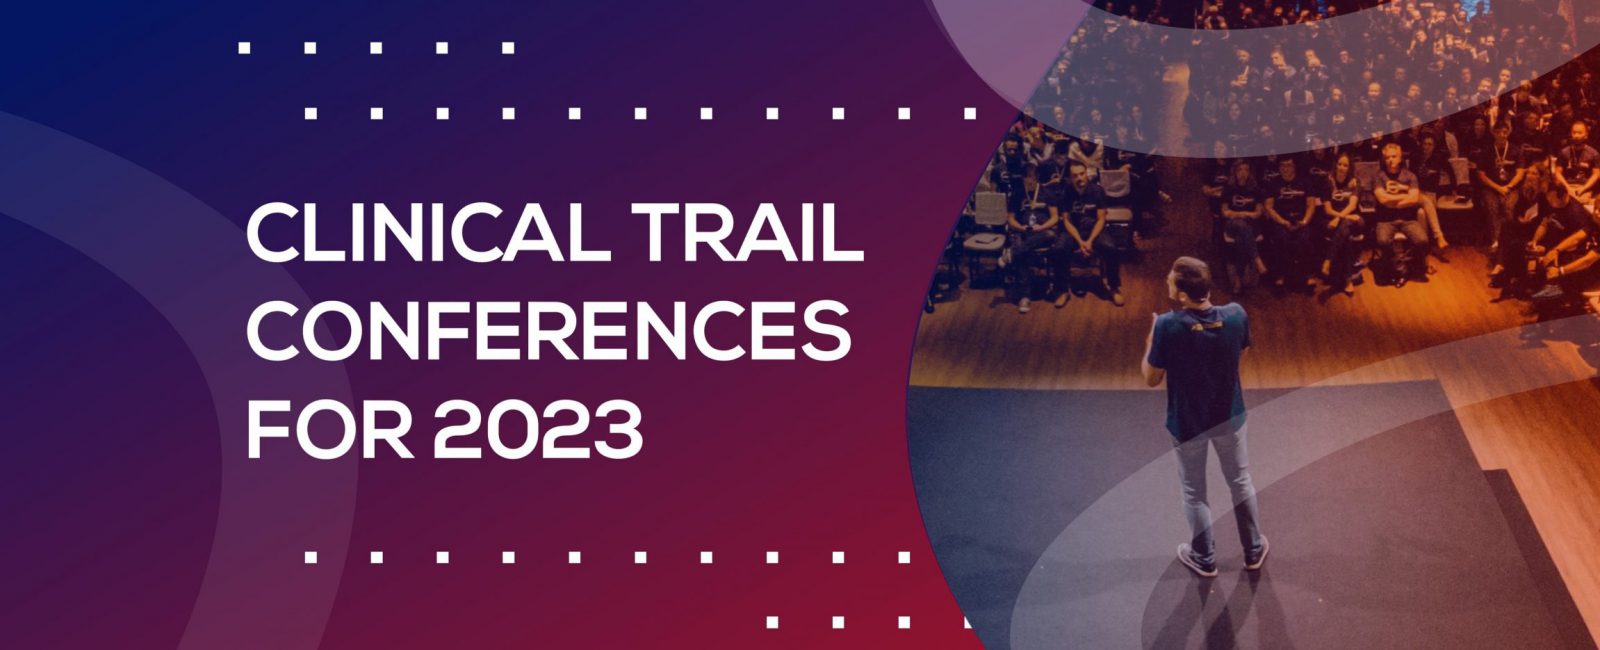 Clinical Trial Conferences 2023